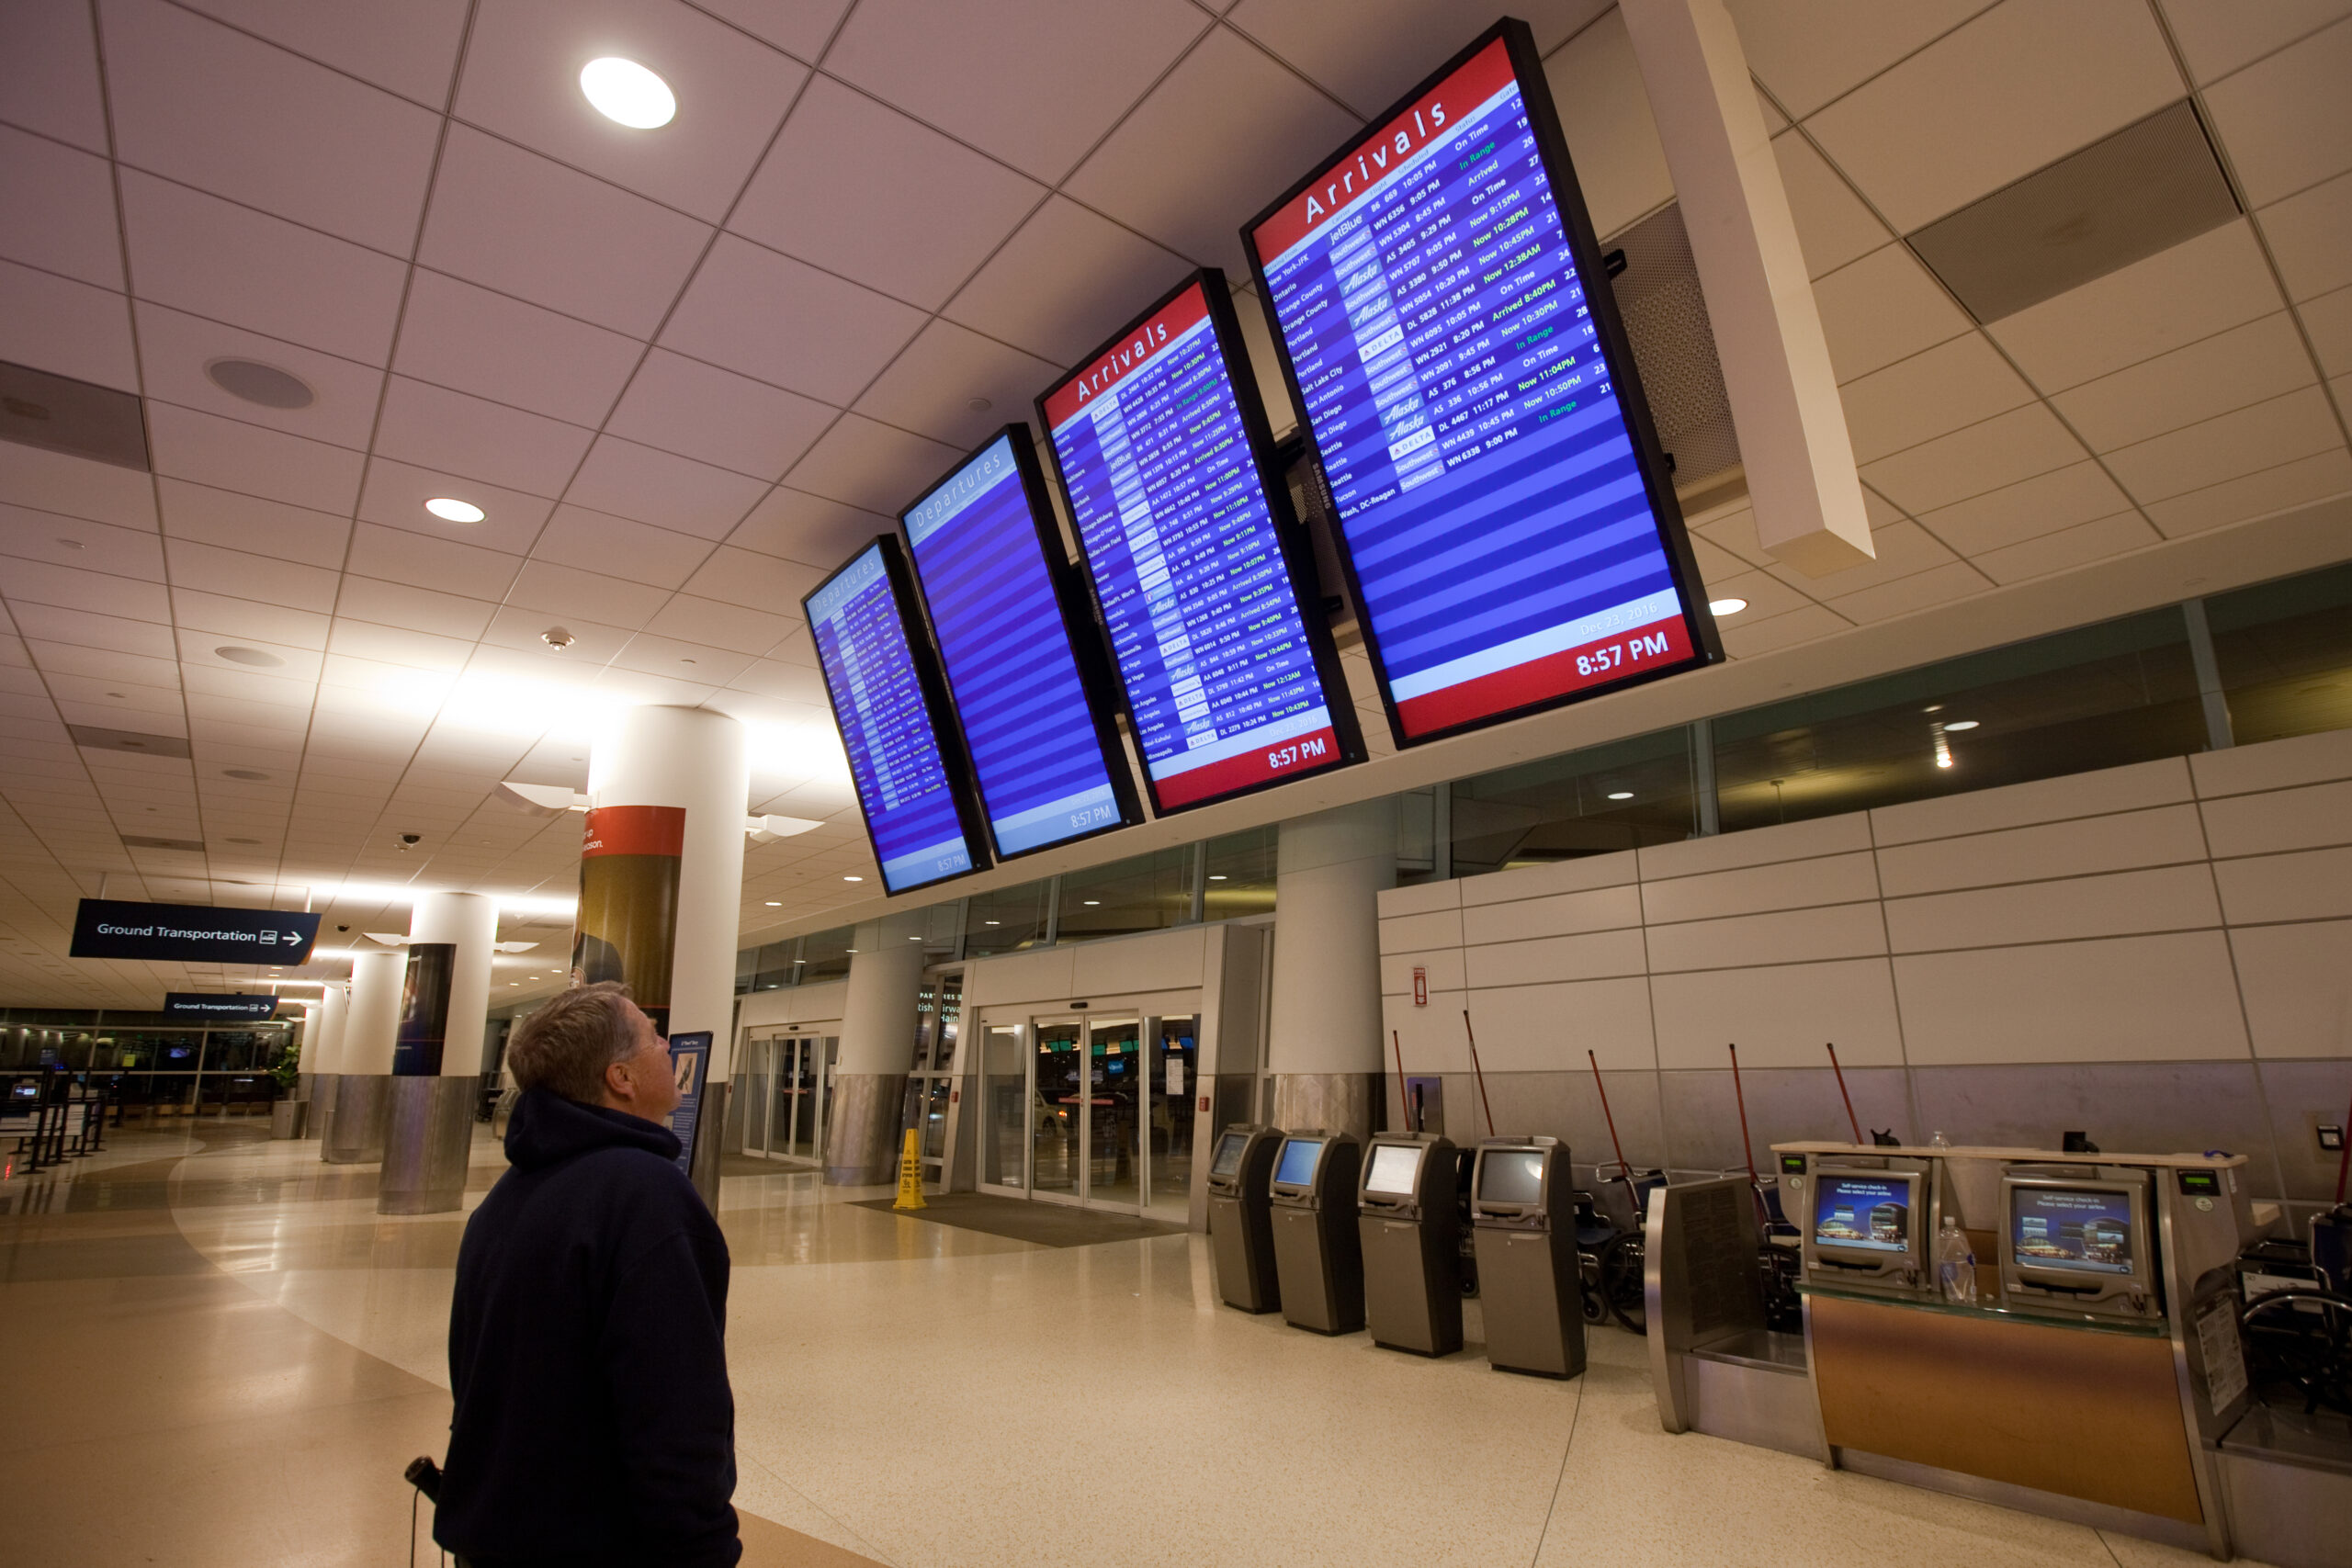 Southwest Airlines is Under a Total Meltdown of Cancellations